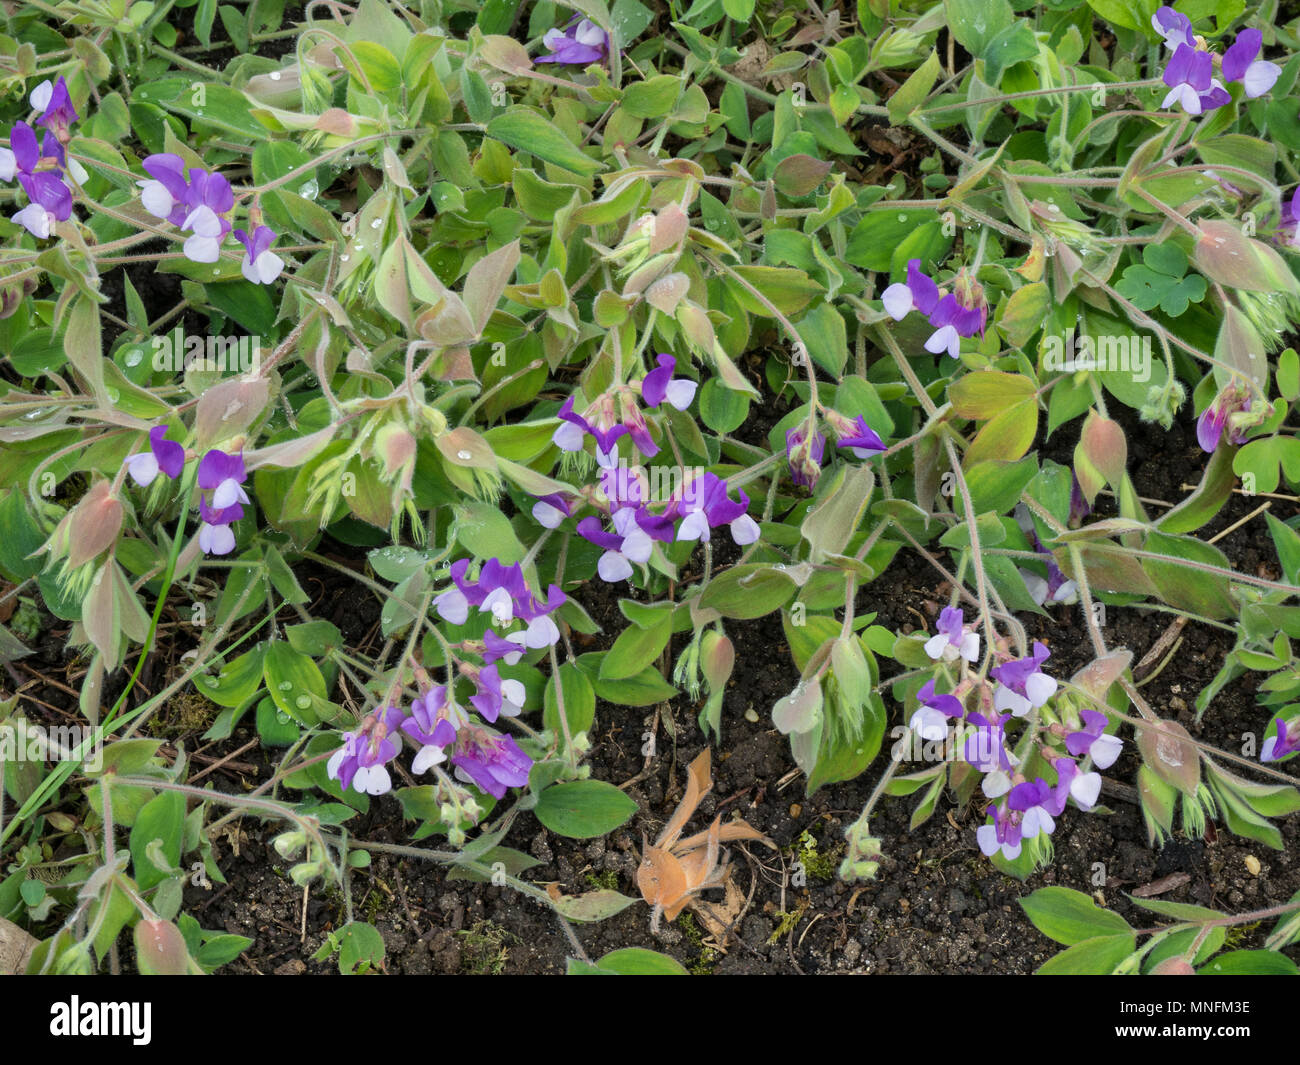 The flowers and soft grey foliage of Lathyrus laxiflorus Stock Photo